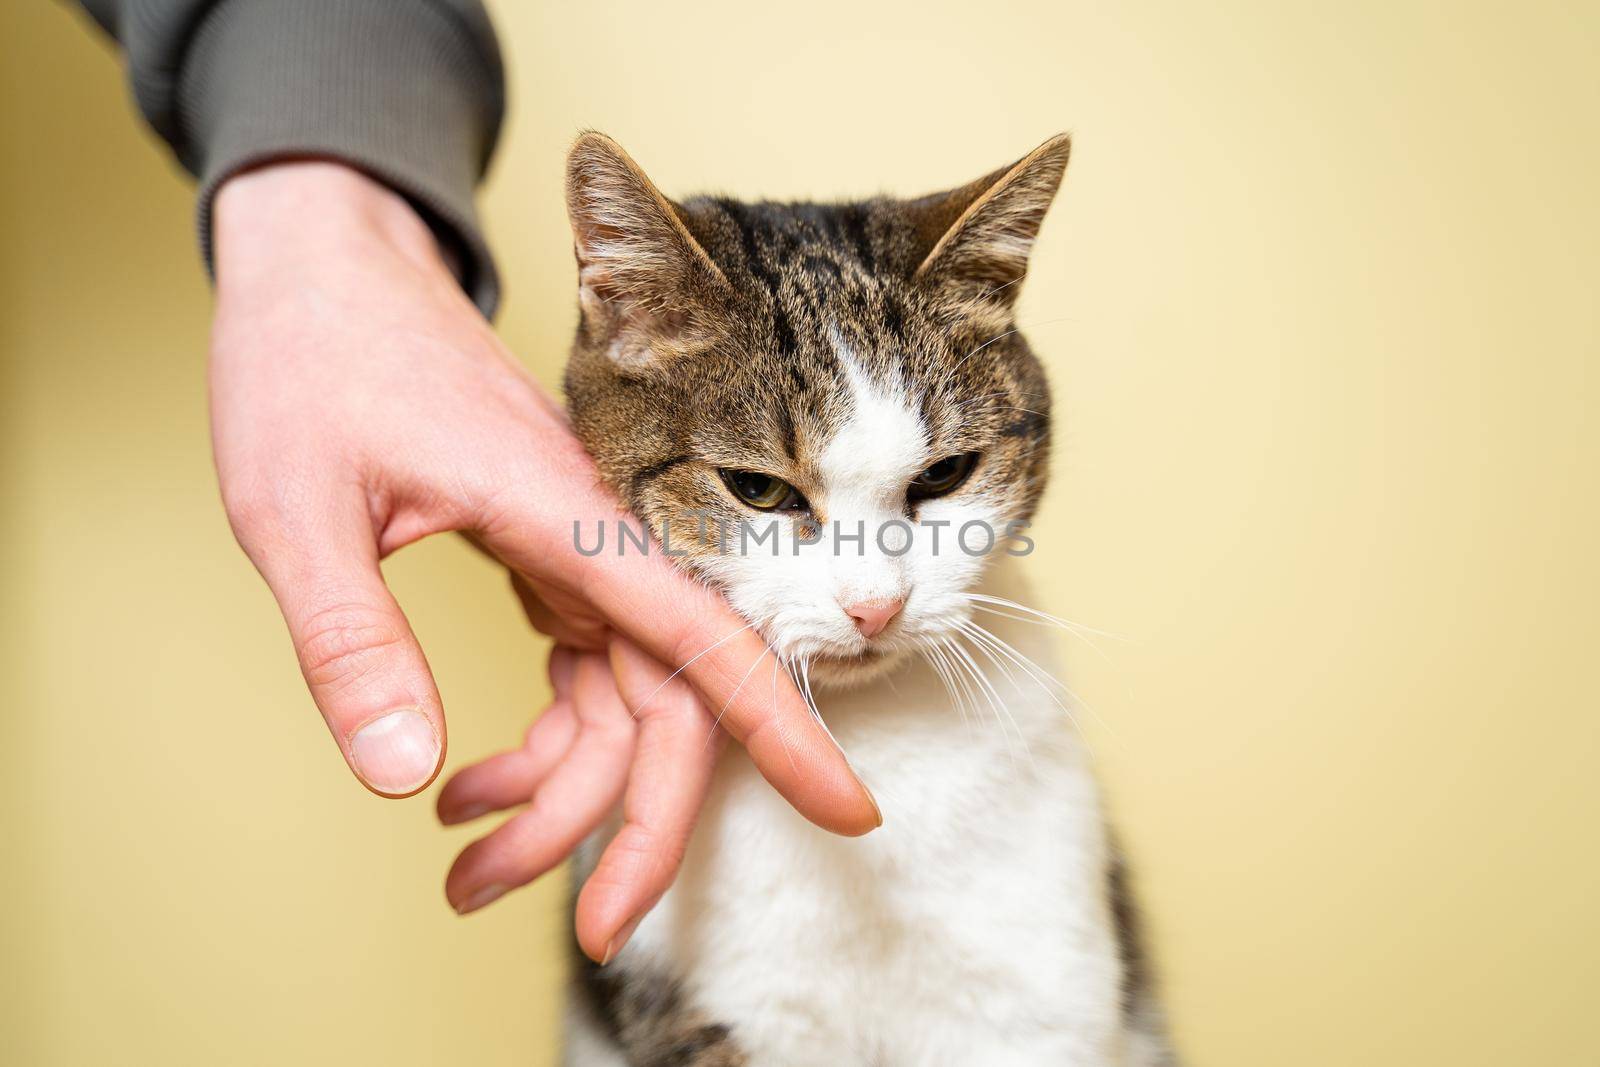 Shelter for animals concept. Caring for pets. Volunteer petting and caressing a stray cat in an animal shelter on a yellow background. Concept of volunteering. Volunteer organization for poor animals.